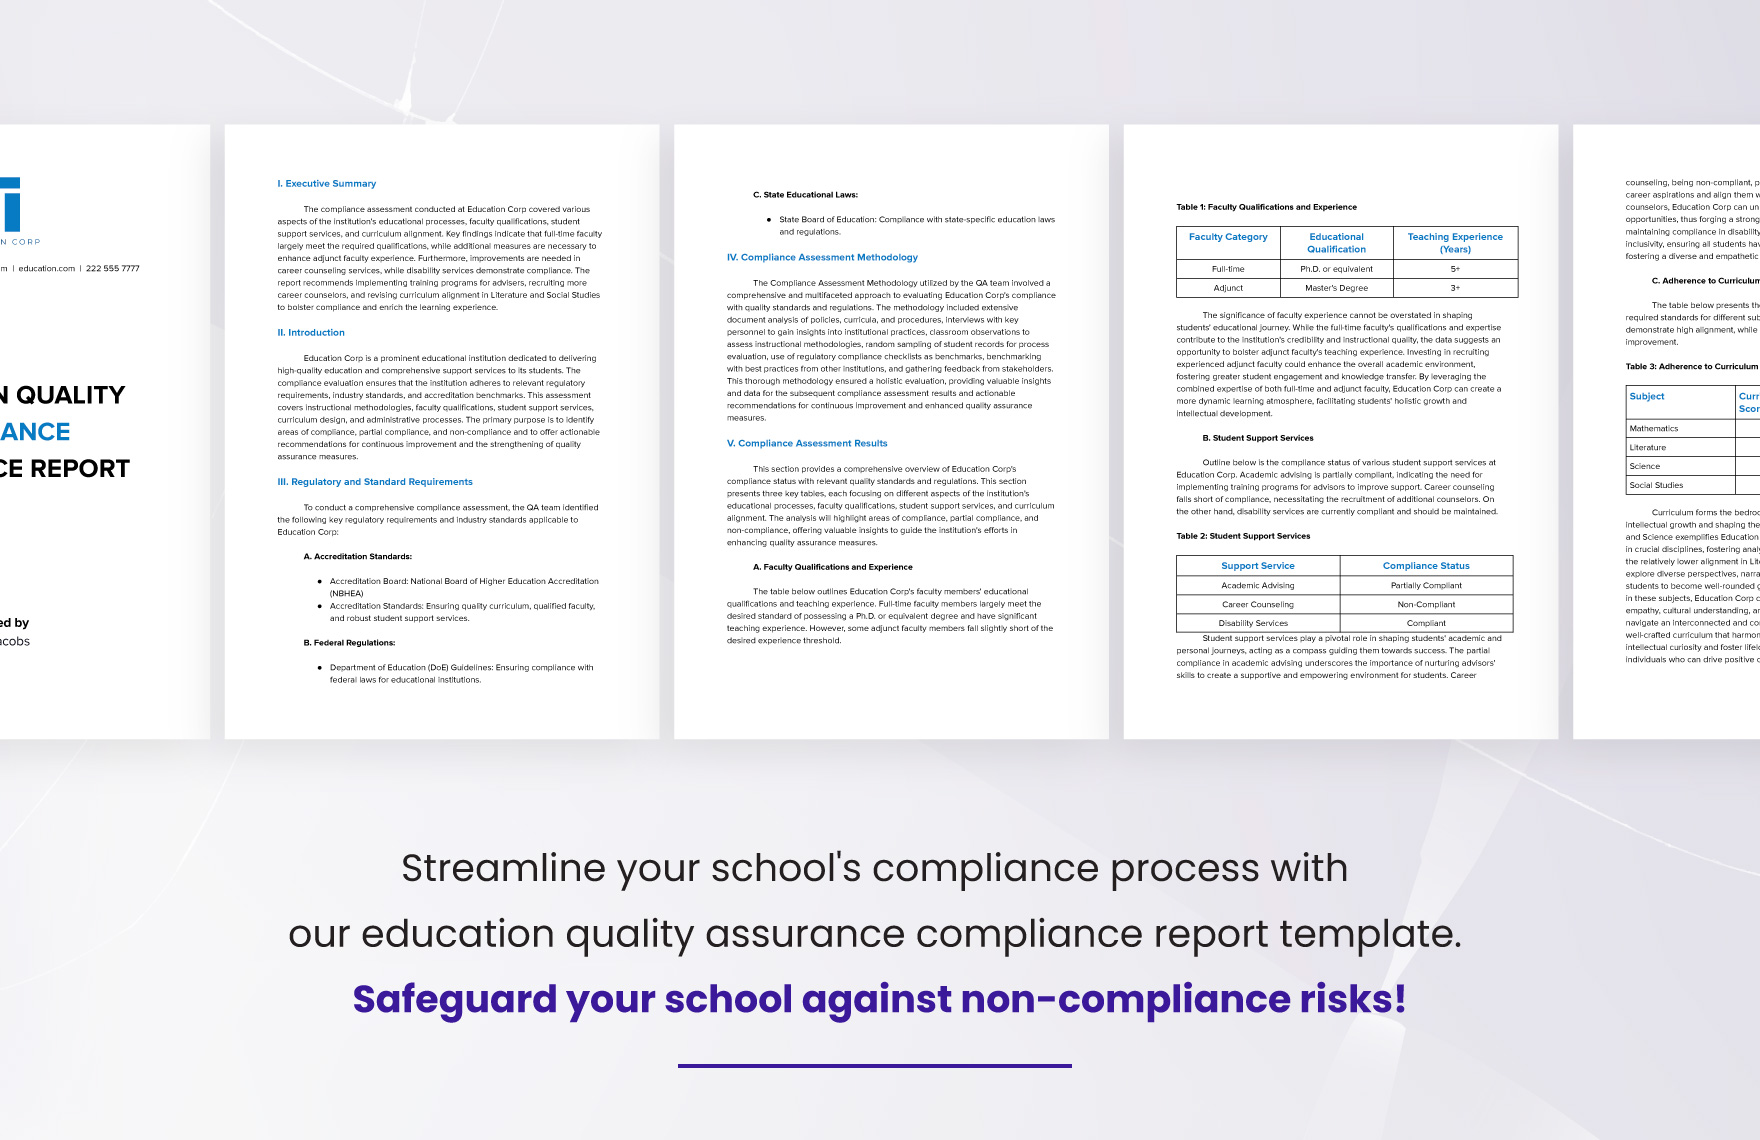 Education Quality Assurance Compliance Report Template